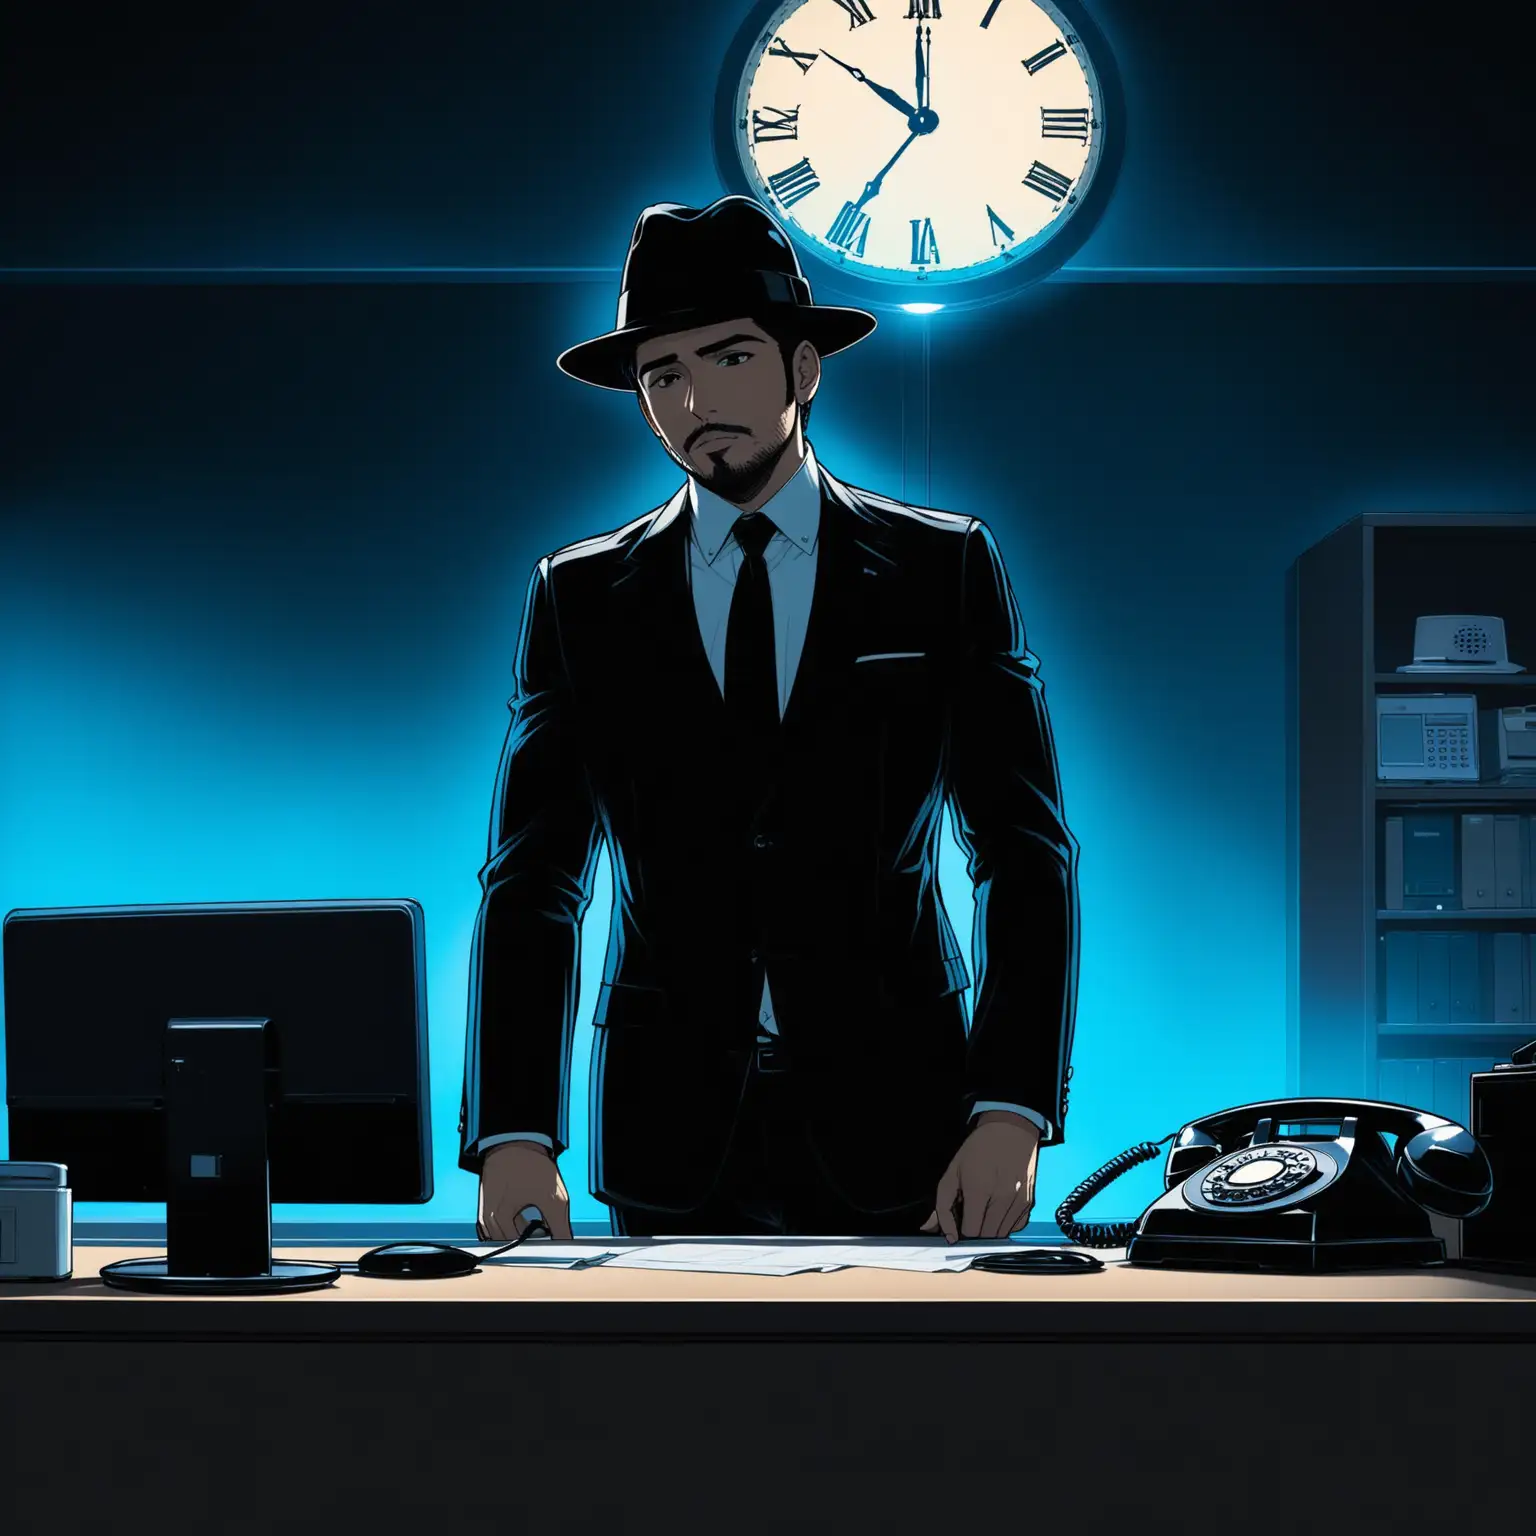 Confident Latino Businessman in Dark Office with Blue Lighting